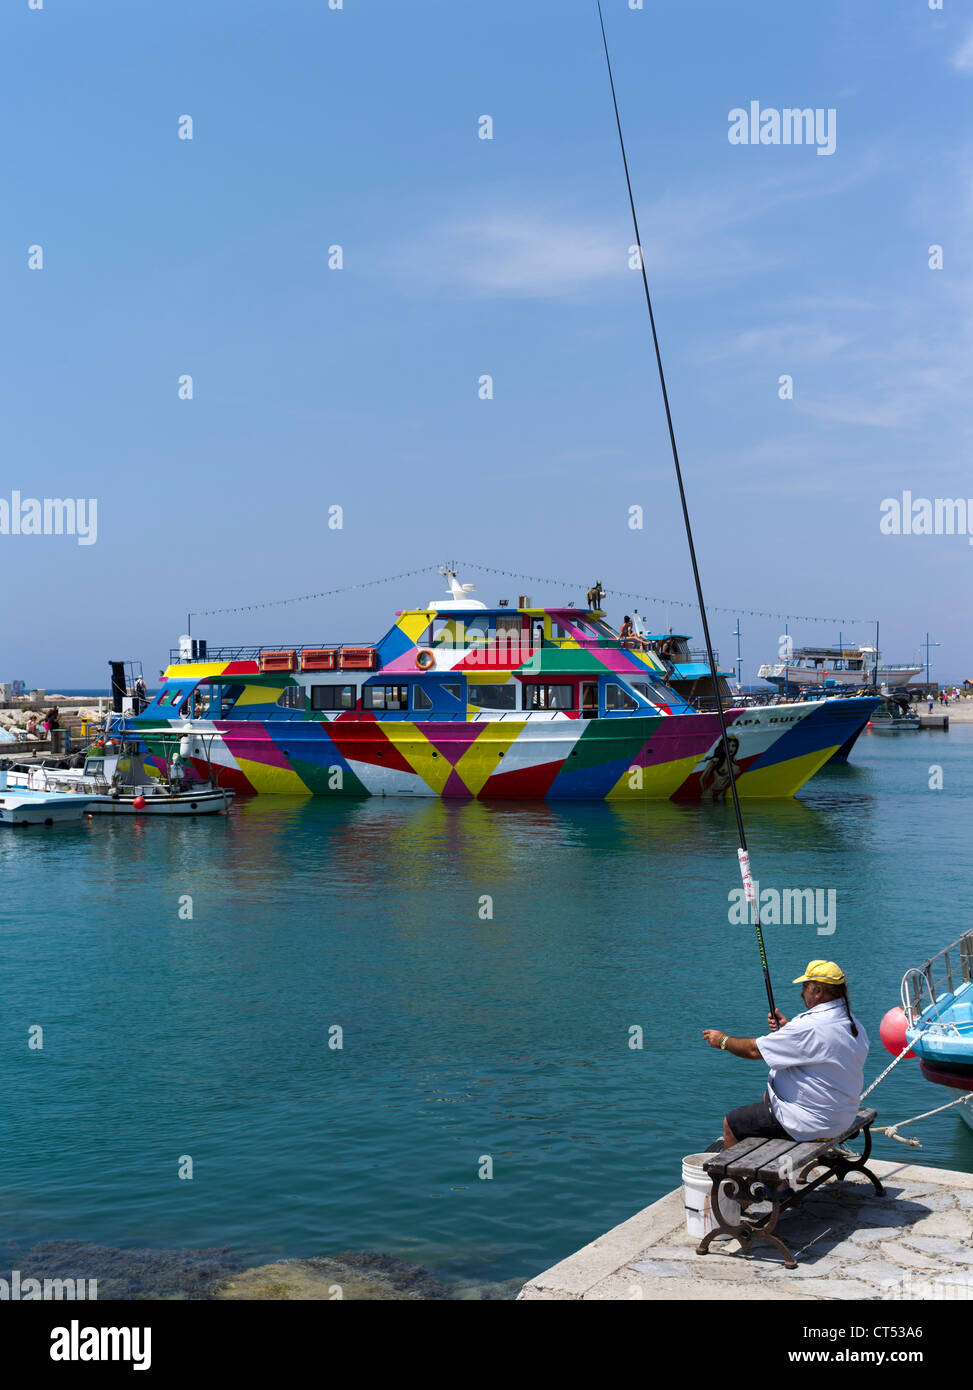 dh Liminaki harbour AYIA NAPA CYPRUS Cypriot angler fishing Tourist holiday party cruise boat greece fish Stock Photo